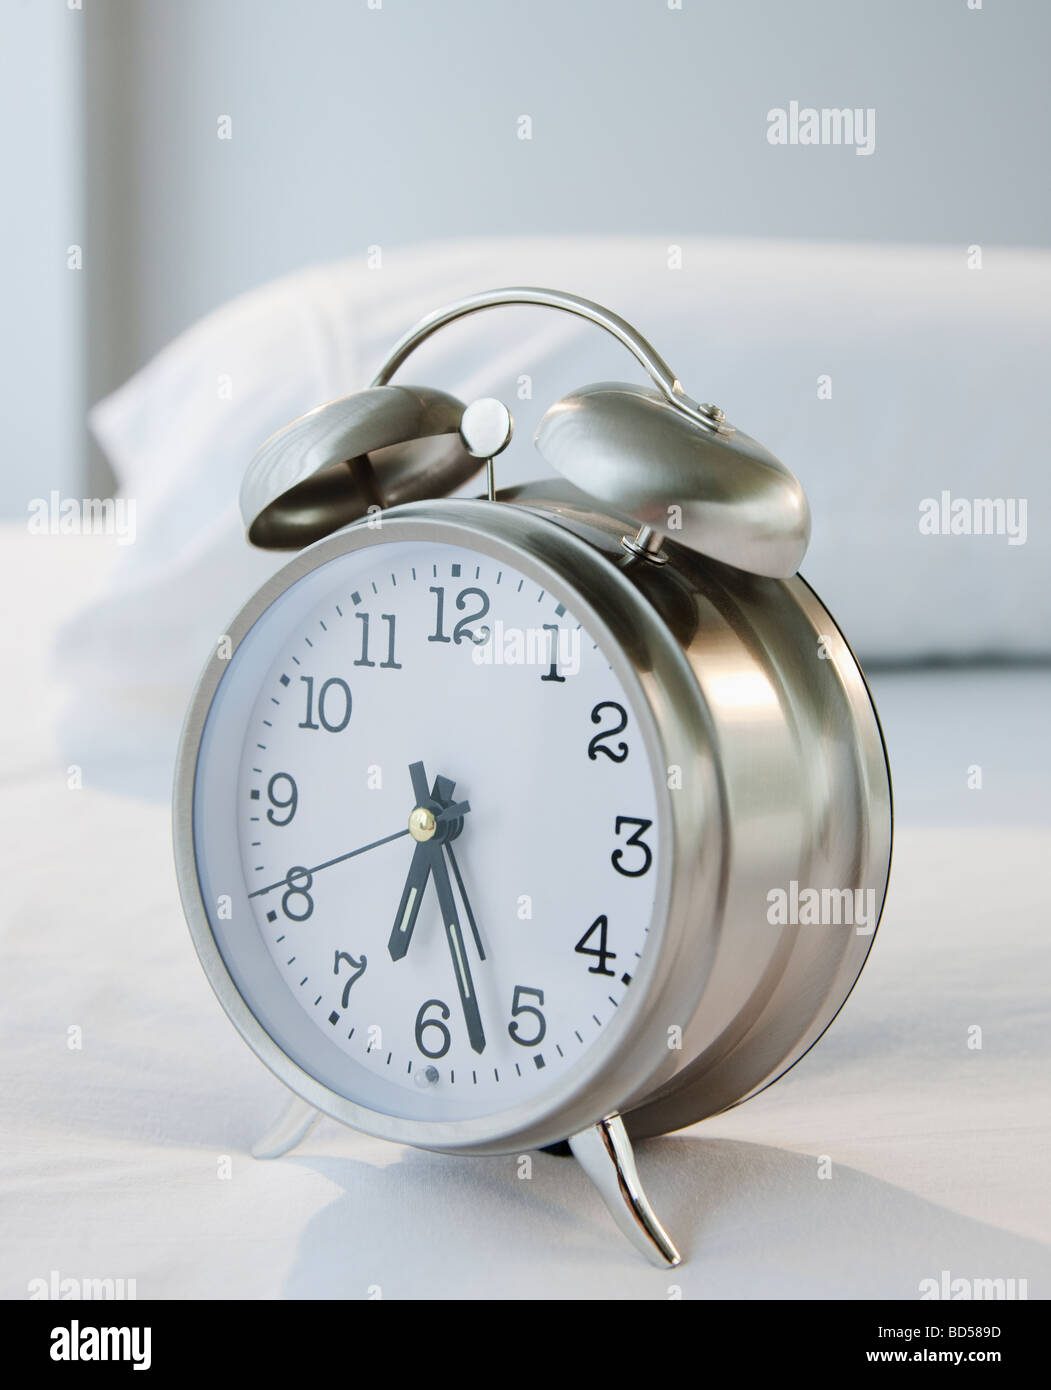 An alarm clock on a bed Stock Photo